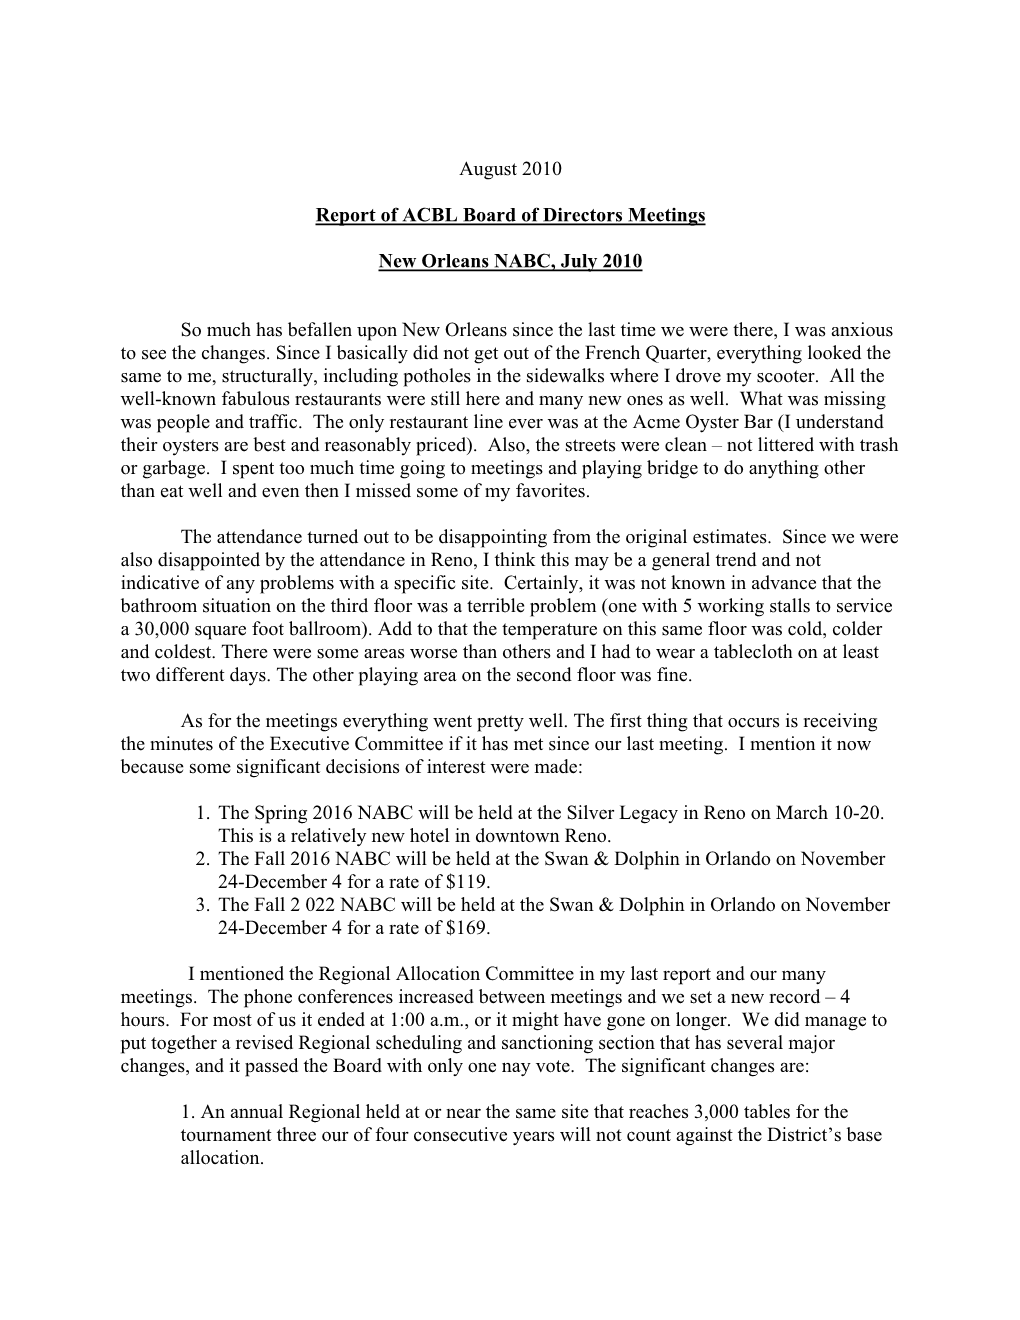 August 2010 Report of ACBL Board of Directors